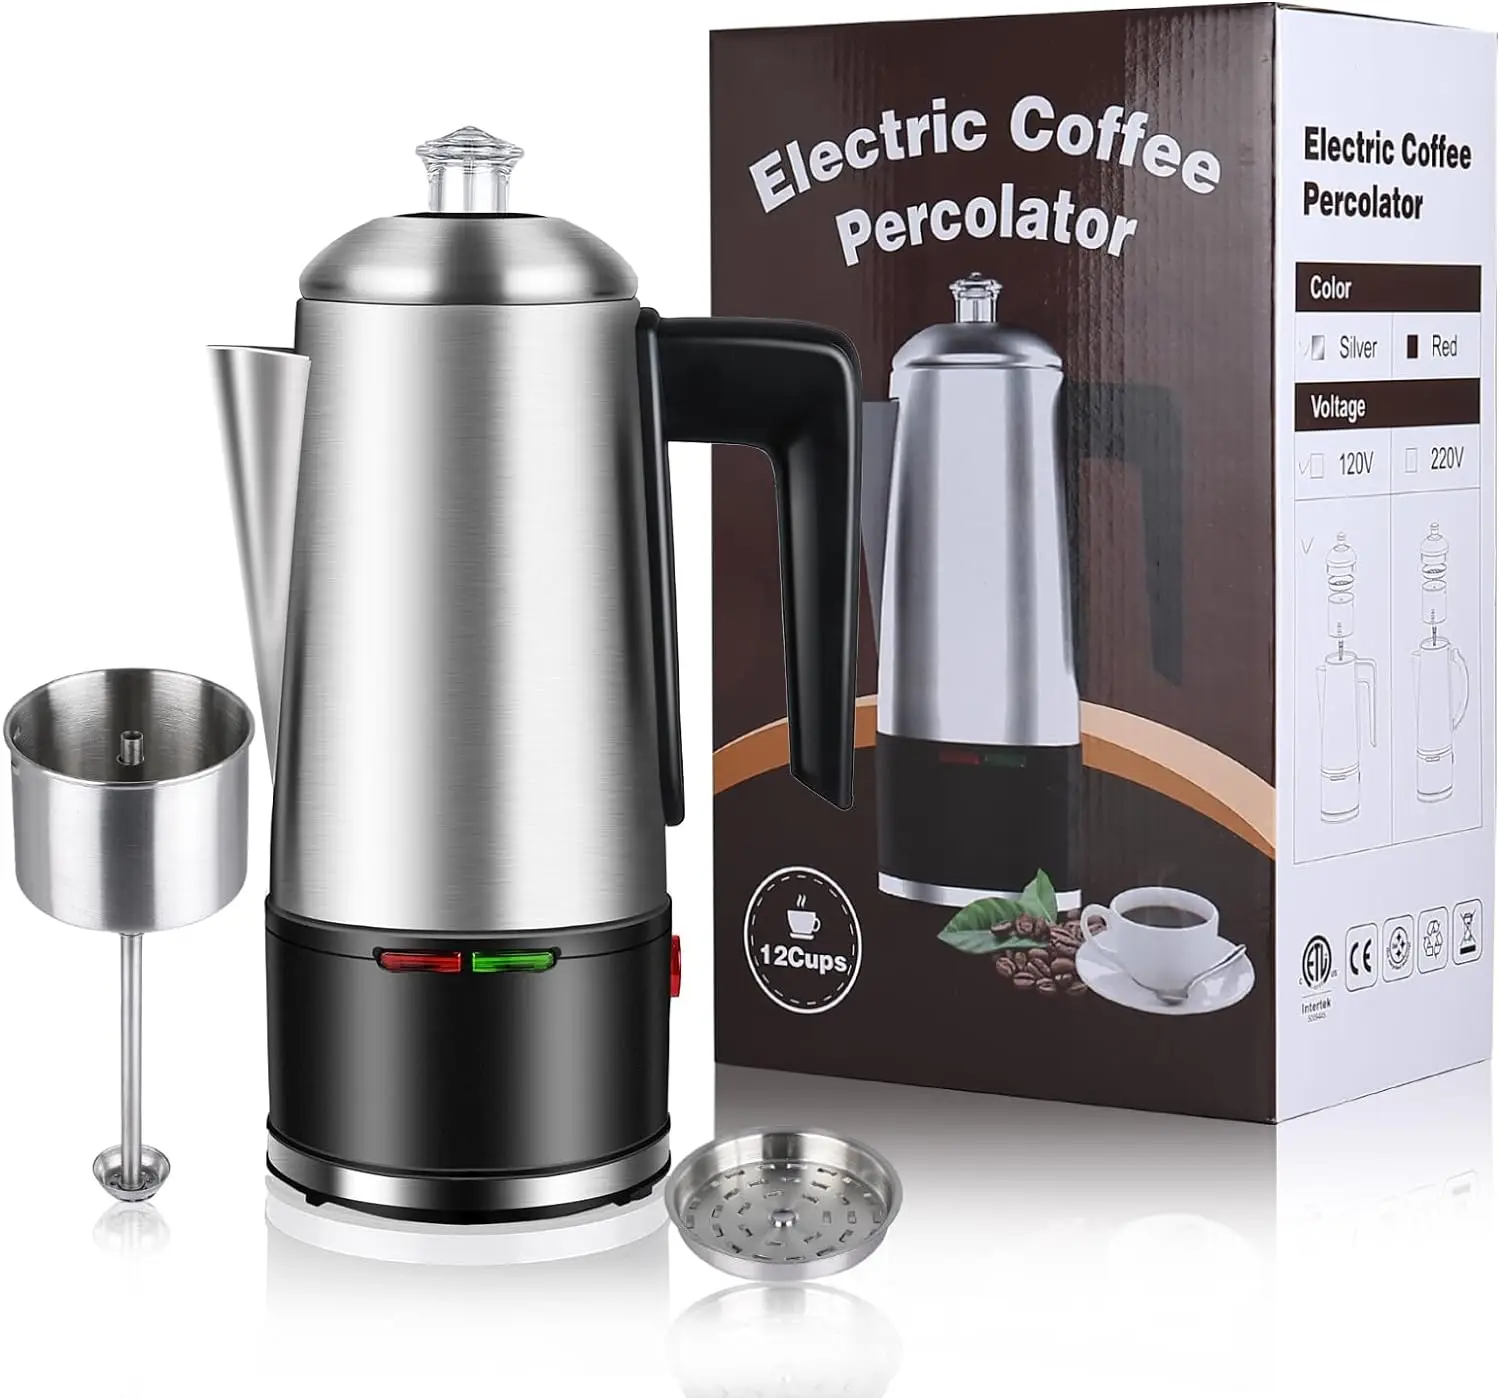 

Percolator 12 CUPS Percolator Coffee Pot, 800W Percolator Coffee Maker Stainless Steel with Clear Knob Cool-touch Handle, Silver